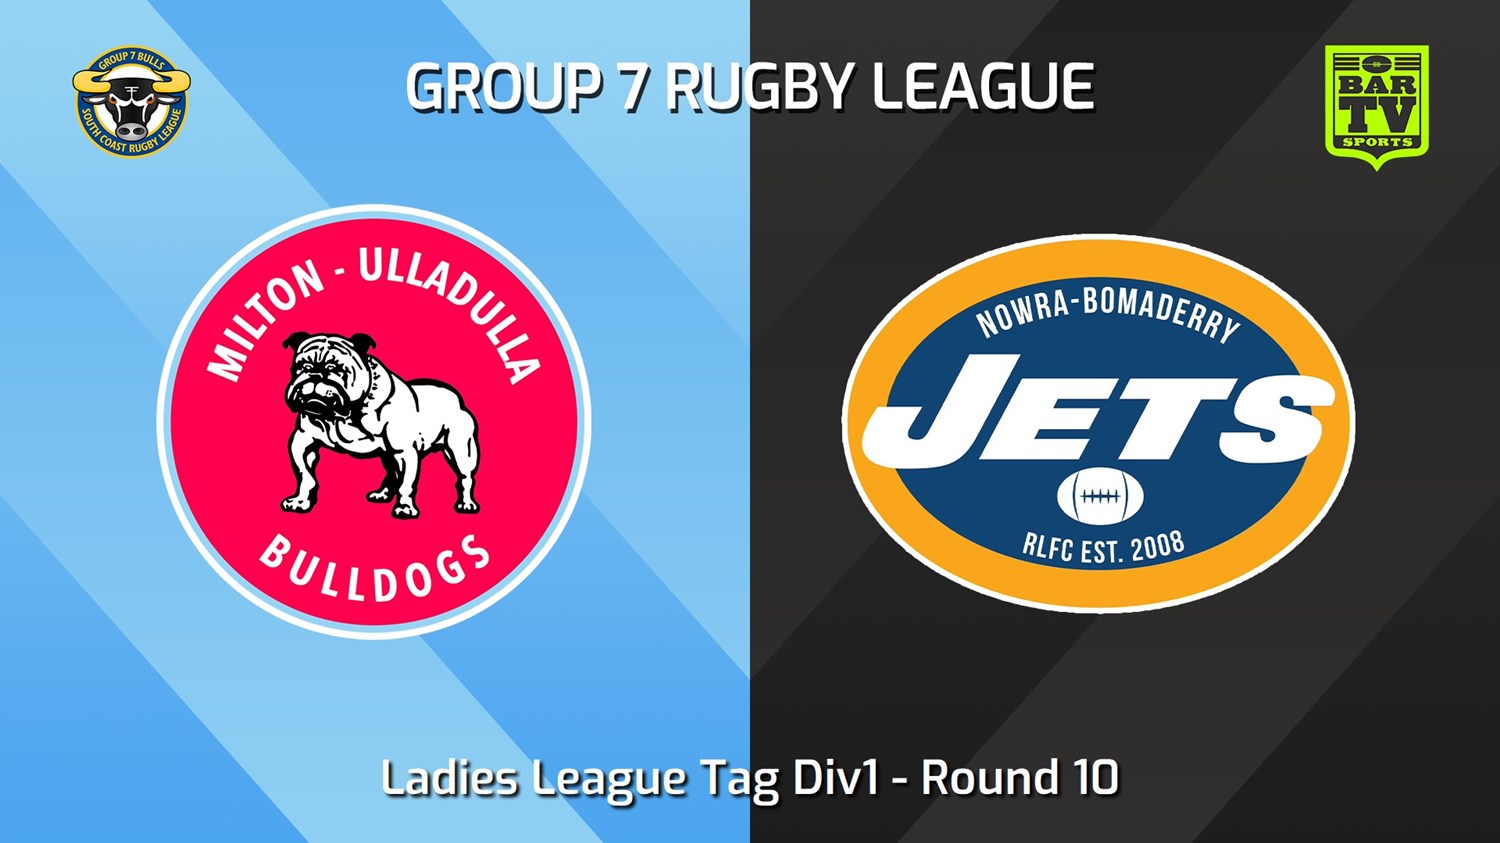 240615-video-South Coast Round 10 - Ladies League Tag Div1 - Milton-Ulladulla Bulldogs v Nowra-Bomaderry Jets Slate Image